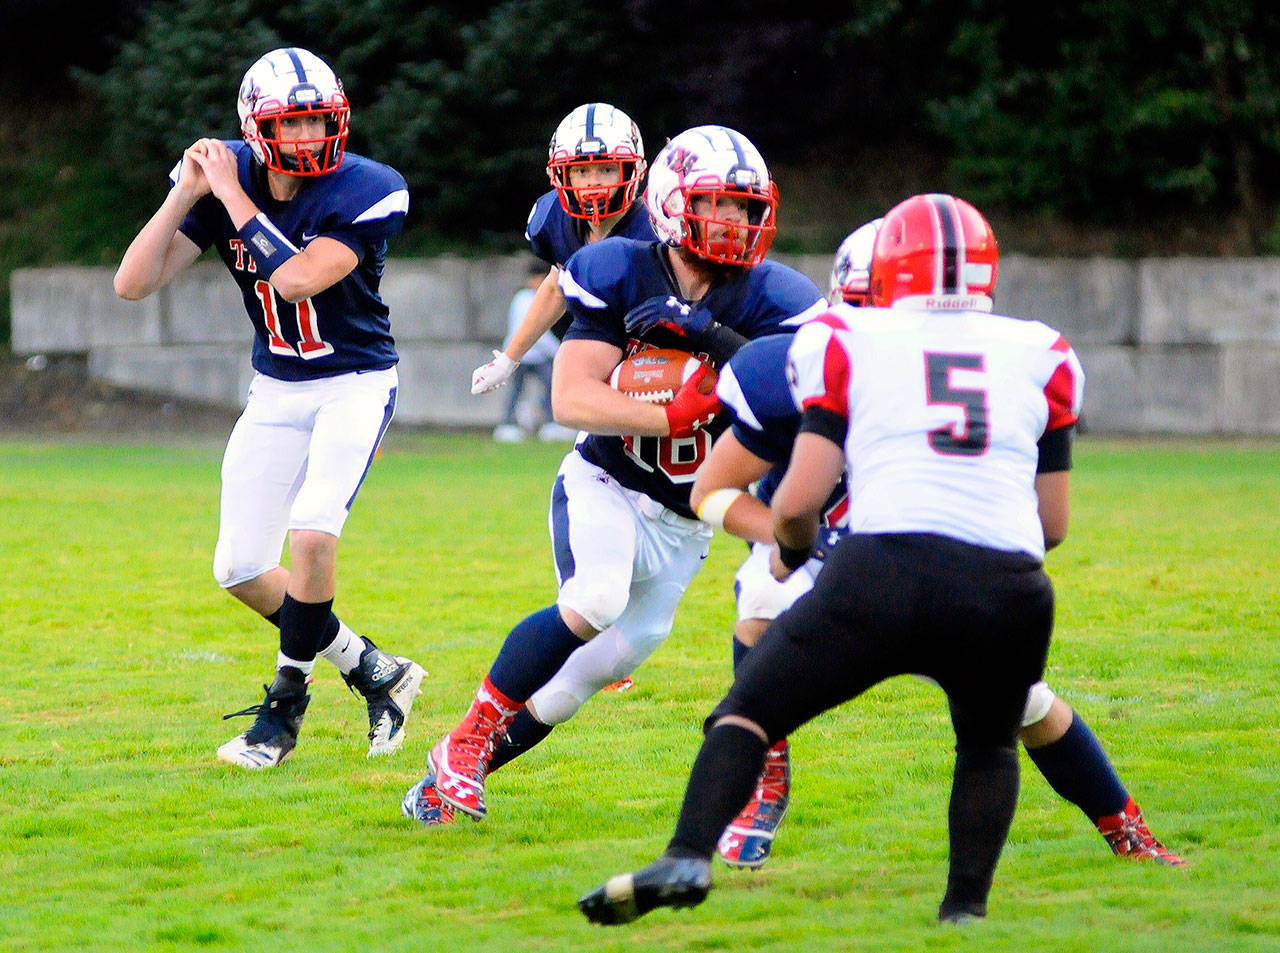 Pe Ell-Willapa Valley running back Max Smith breaks toward the open field in the first quarter against Raymond. Smith had four rushing touchdowns and 154 yards on the ground in the Titan’s 49-0 victory. (Hasani Grayson | Grays Harbor News Group)